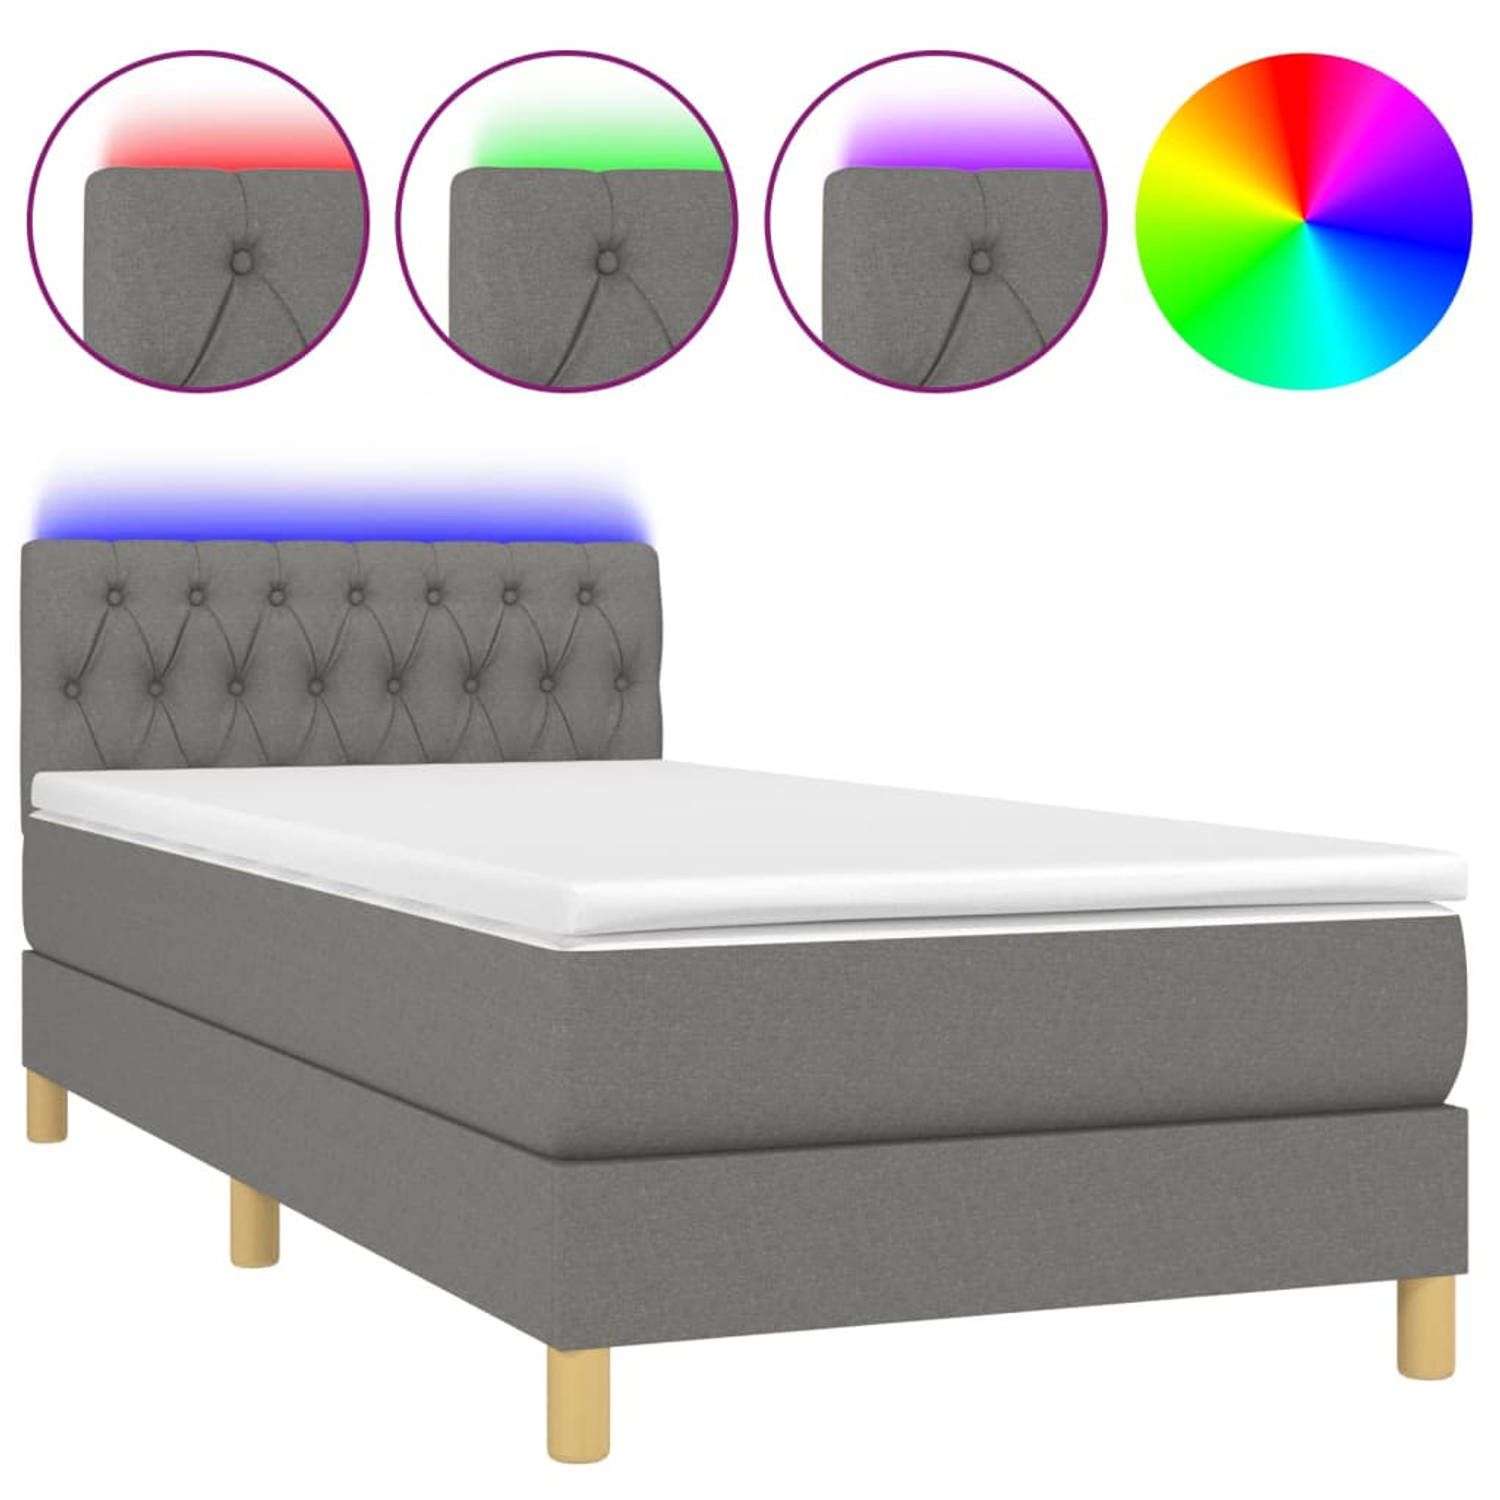 The Living Store Boxspring met matras en LED stof donkergrijs 90x200 cm - Boxspring - Boxsprings - Bed - Slaapmeubel - Boxspringbed - Boxspring Bed - Tweepersoonsbed - Bed Met Matr